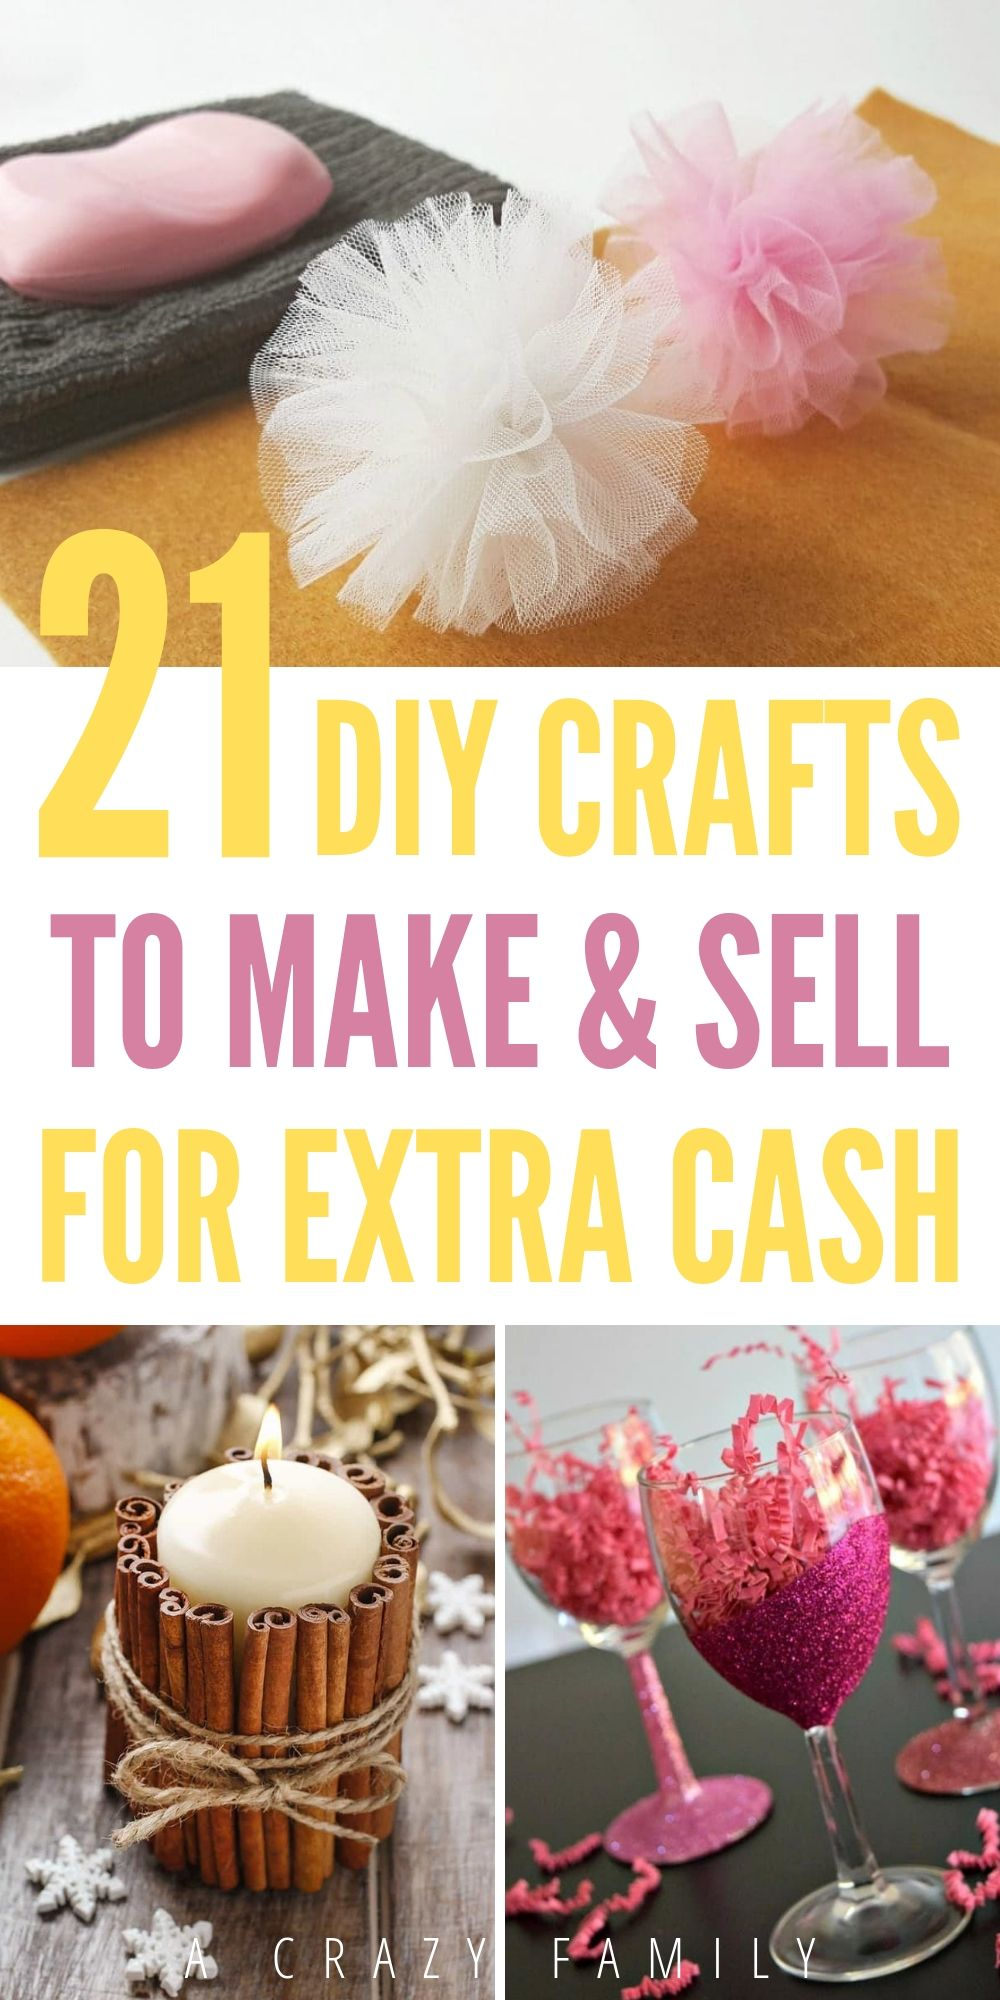 21 DIY Crafts To Make And Sell For Extra Cash -   22 home decor diy crafts how to make ideas